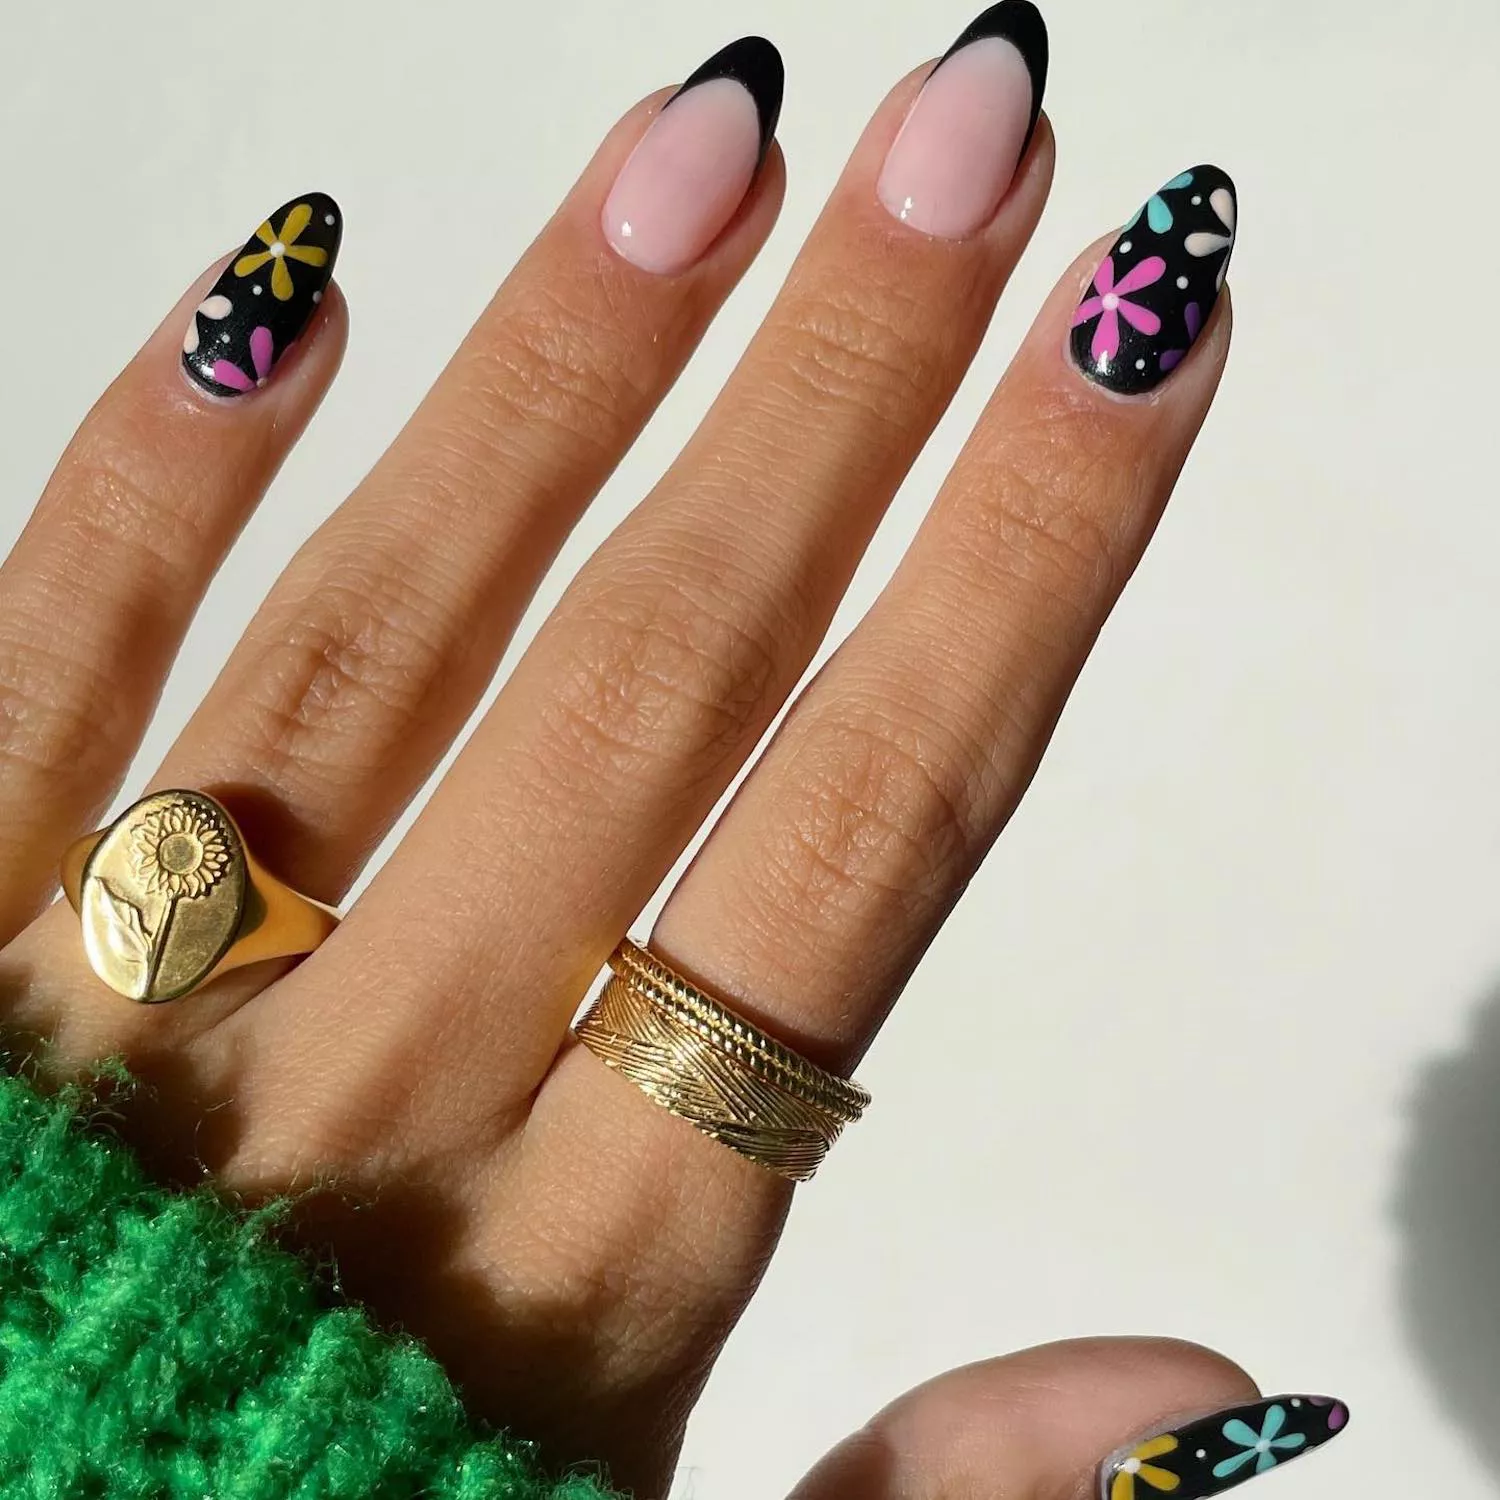 Black manicure with French tip accent nails and multicolored retro floral nail designs